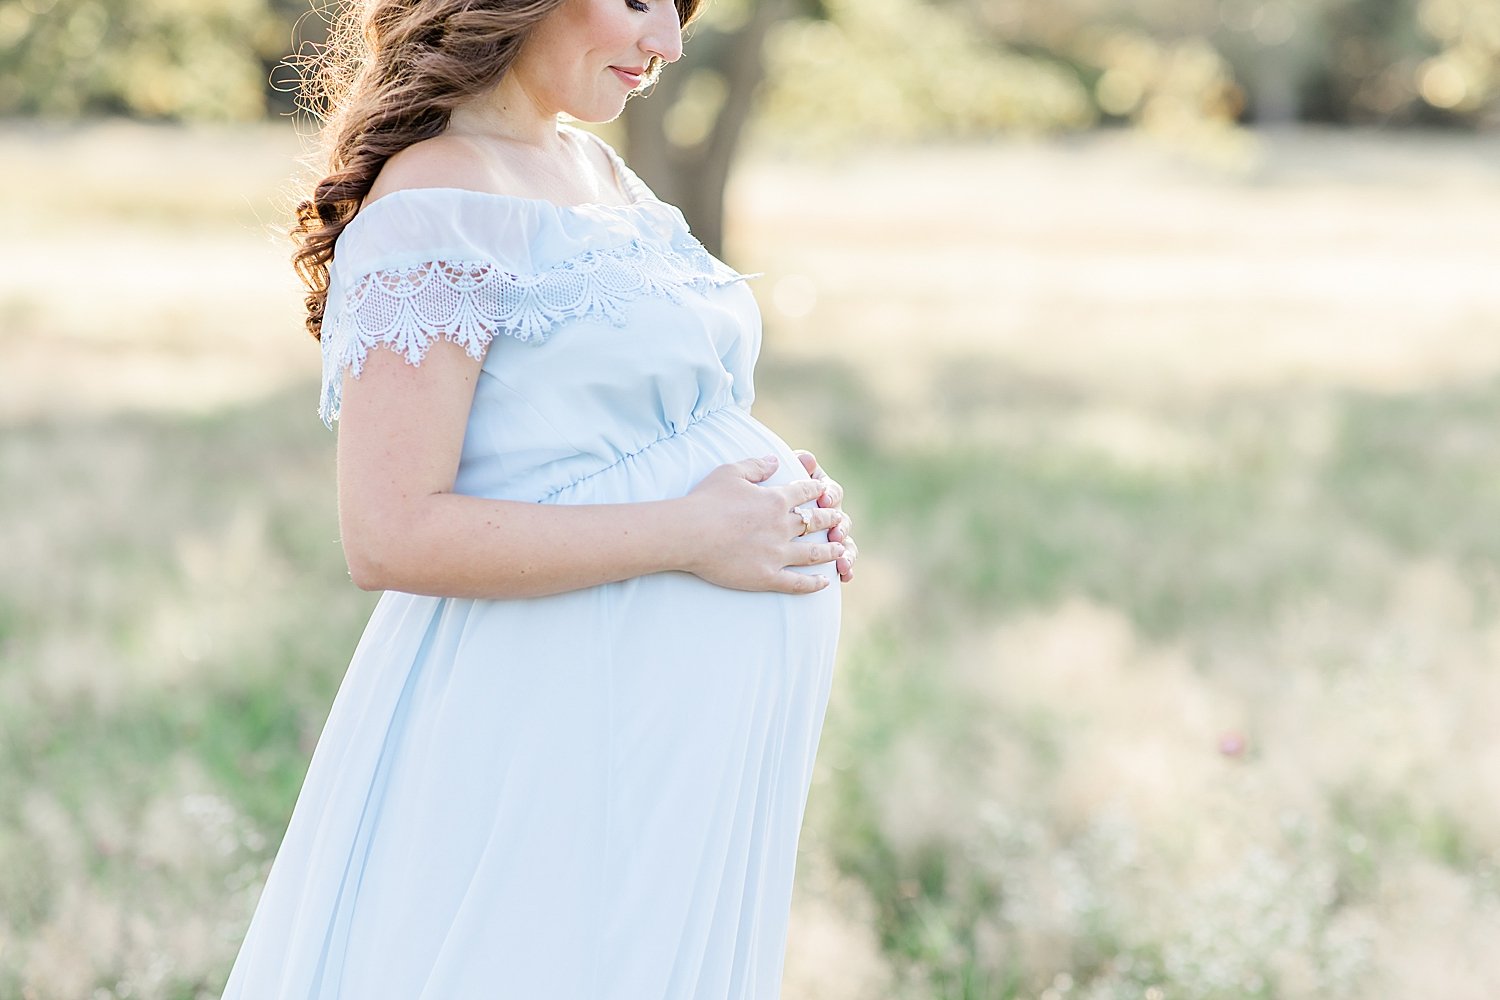 Why You Should Hire a Photographer for Your Baby's First Year | Maternity photo in field at Waveny Park in CT | Kristin Wood Photography